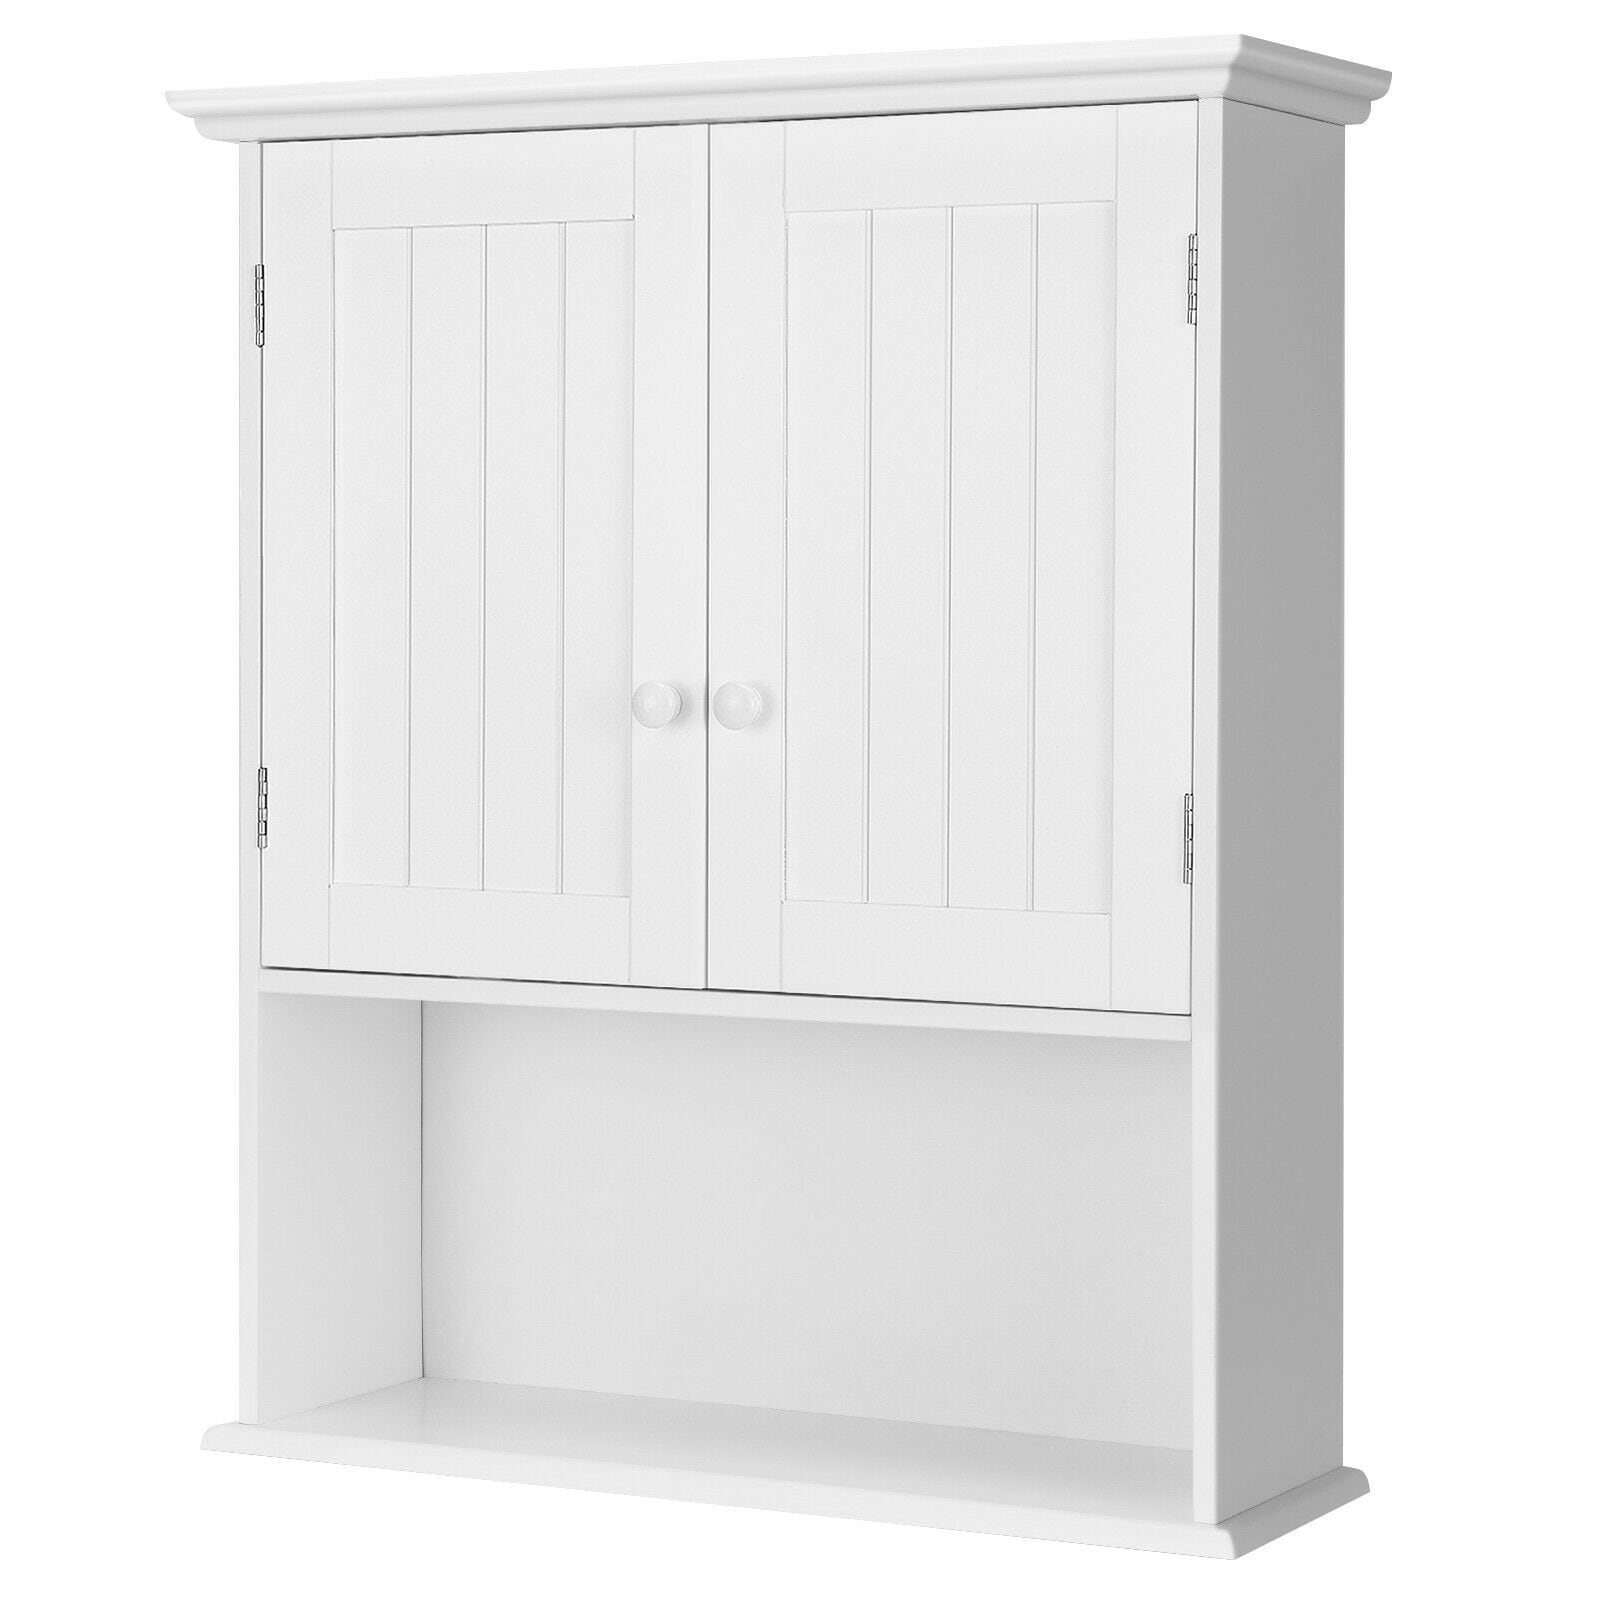 https://ak1.ostkcdn.com/images/products/is/images/direct/0844ab615ea592289e02f19945465a92282e43a7/Wall-mounted-Bathroom-Medicine-Cabinet-White.jpg